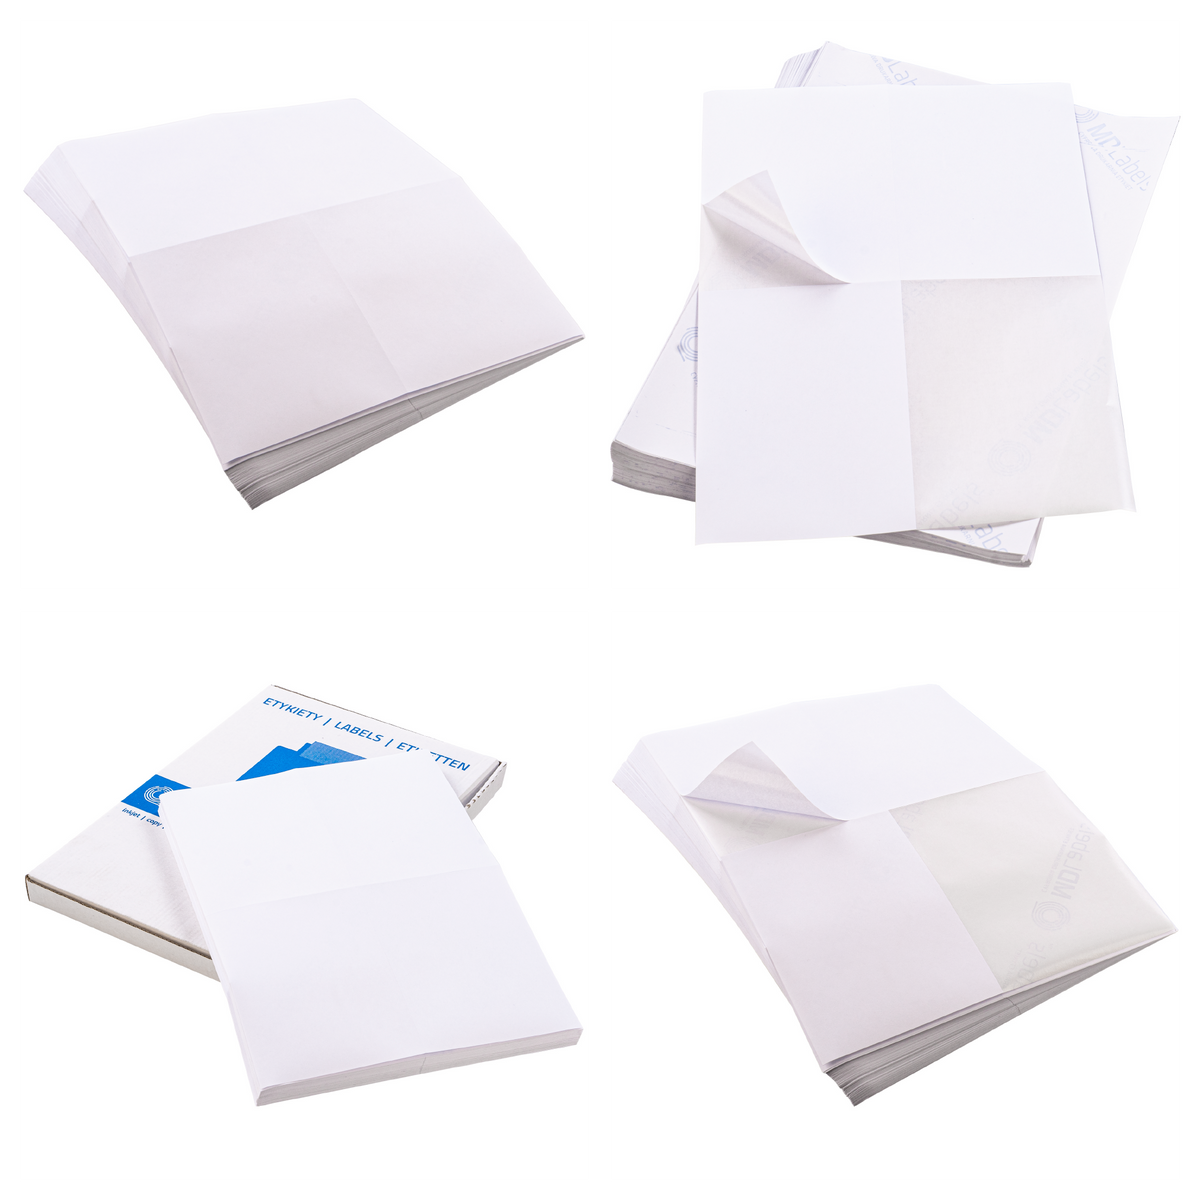 Labels on A4 INPOST A4 105x148 self-adhesive 100 sheets